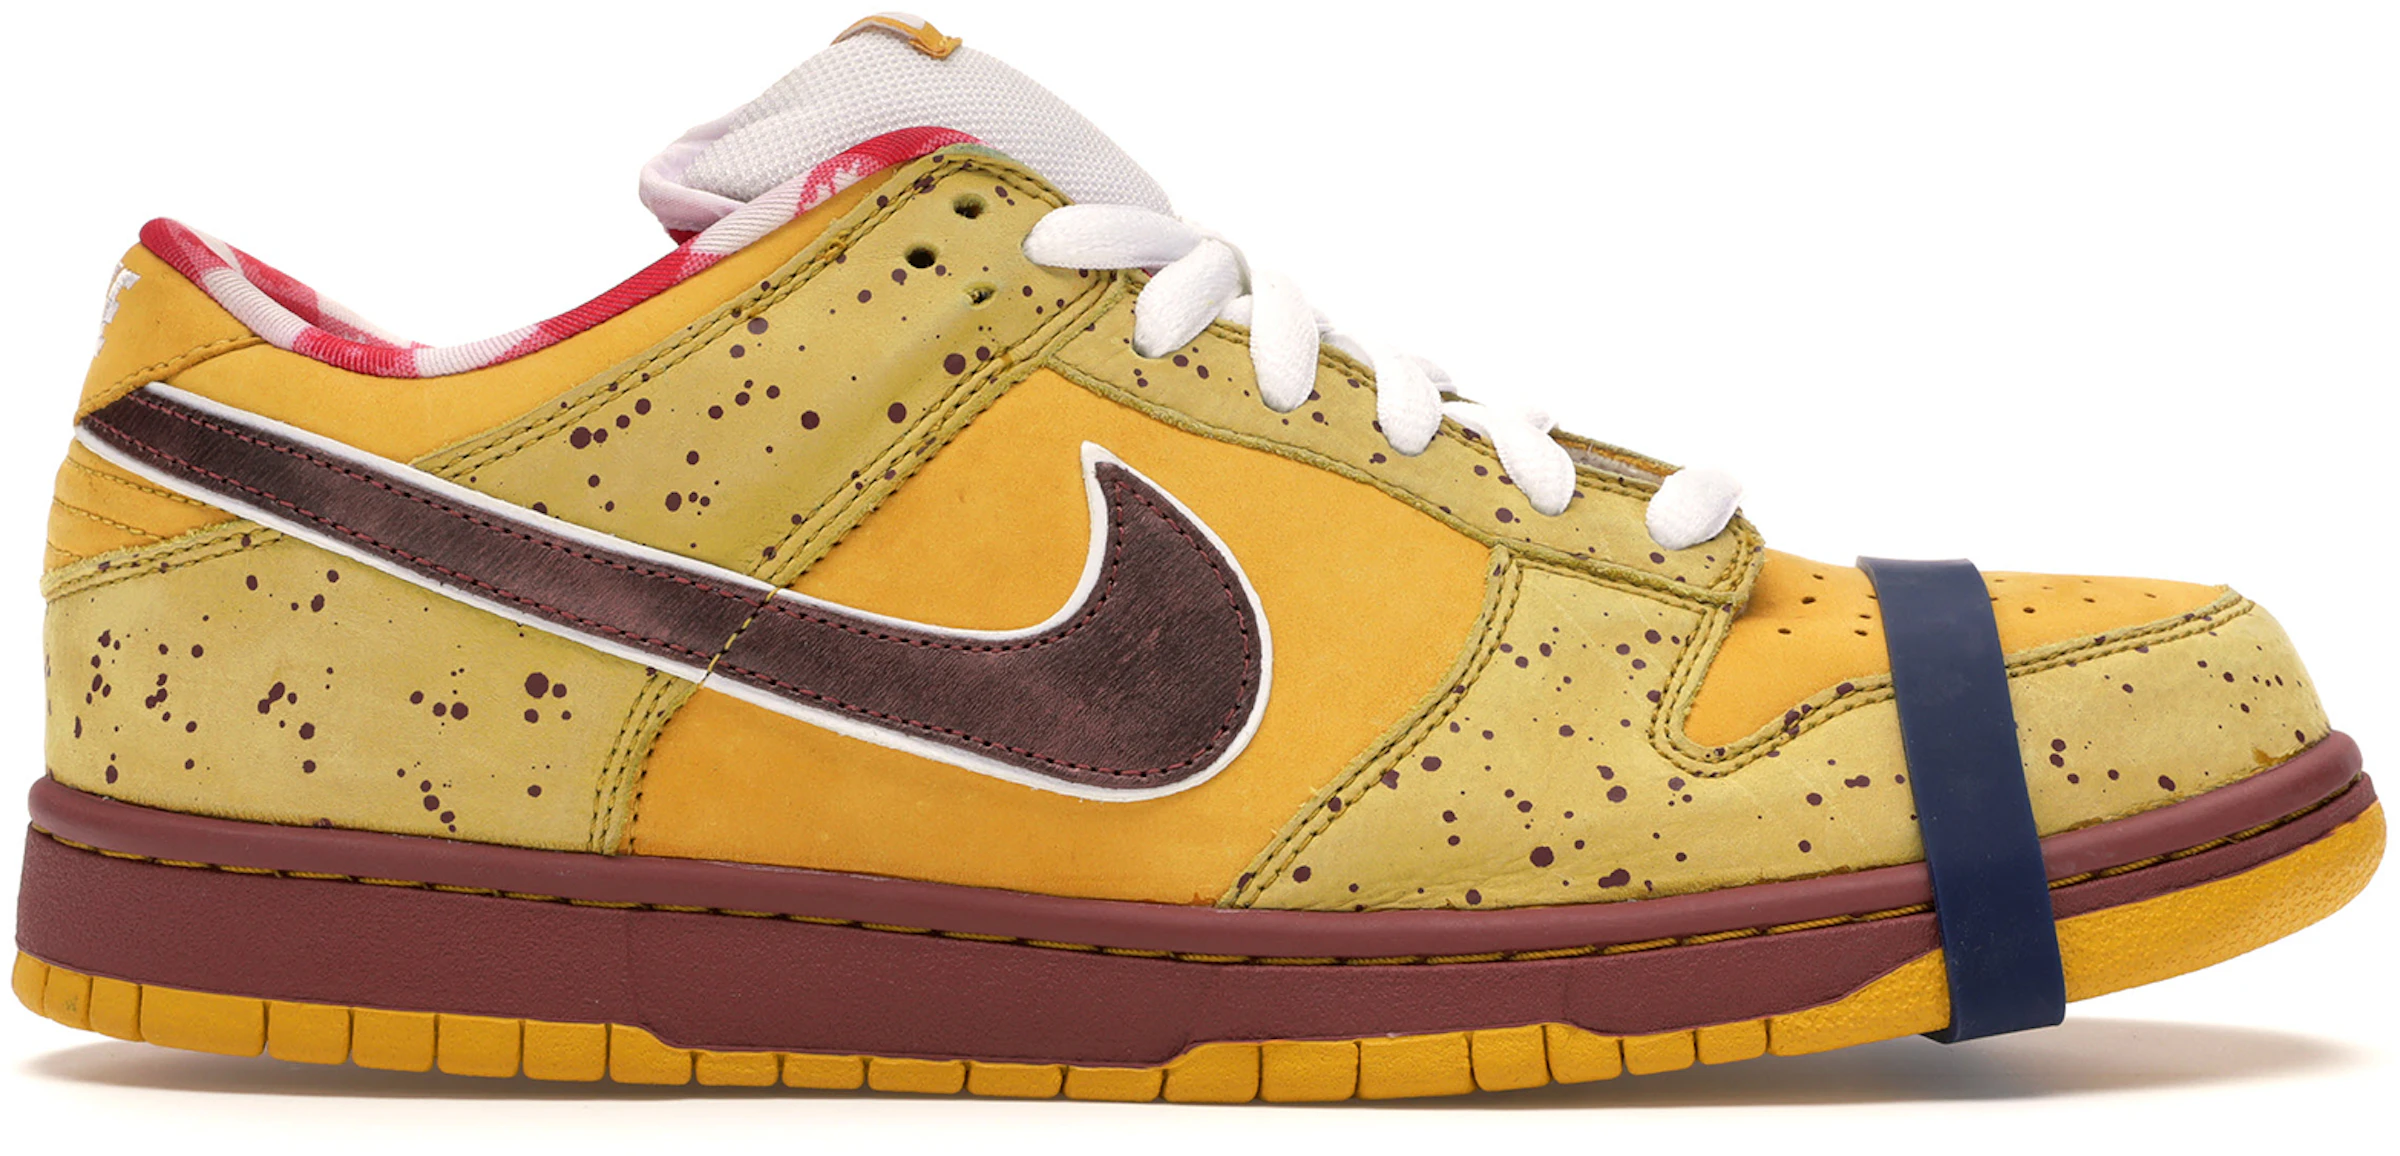 SB Dunk Low Yellow Lobster - 313170-137566 - US